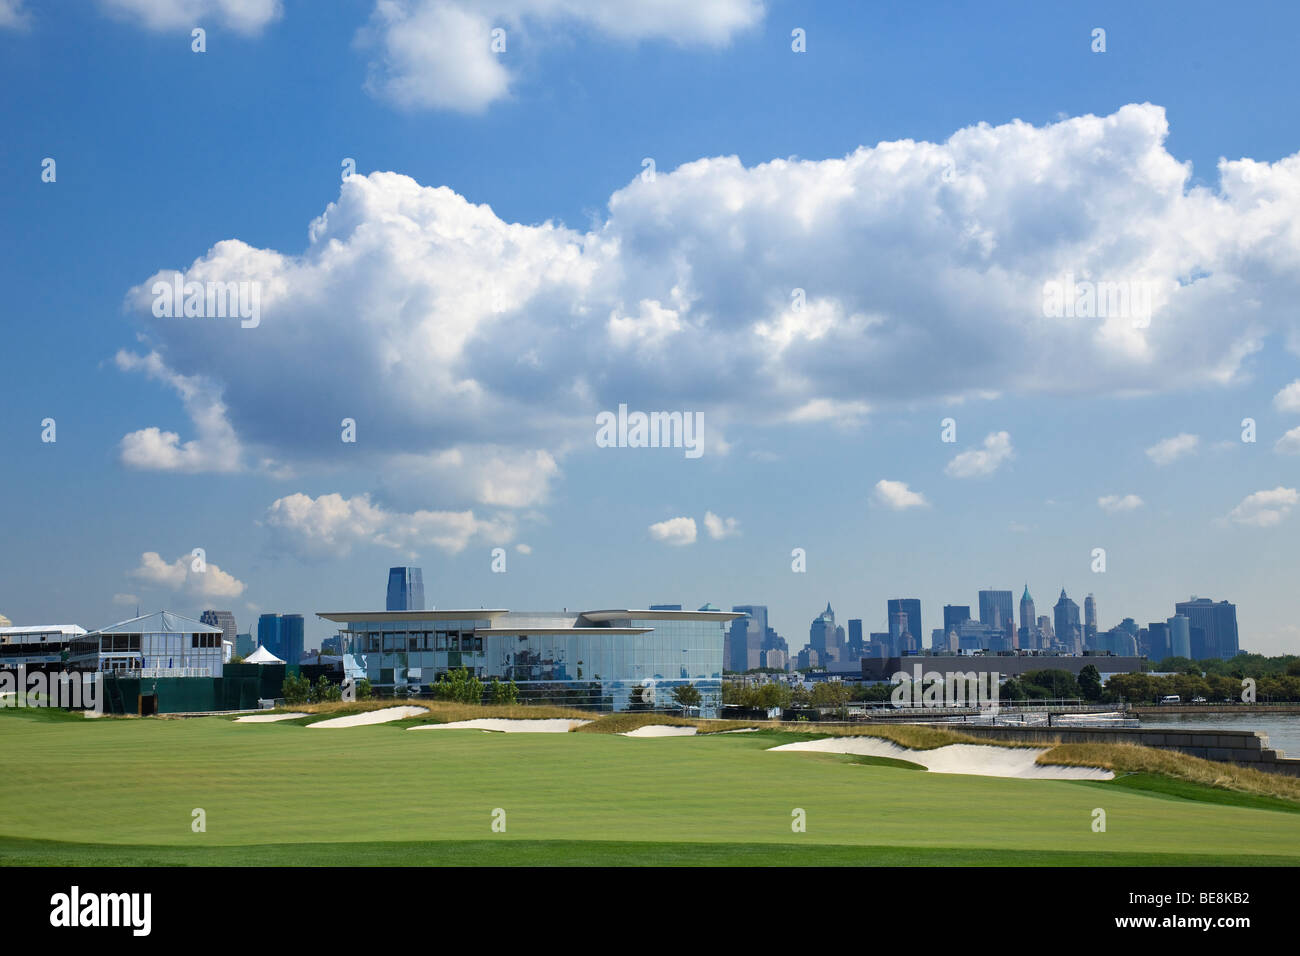 Liberty National Golf Course on the 18th Fairway with Clubhouse and views of Manhattan. Stock Photo